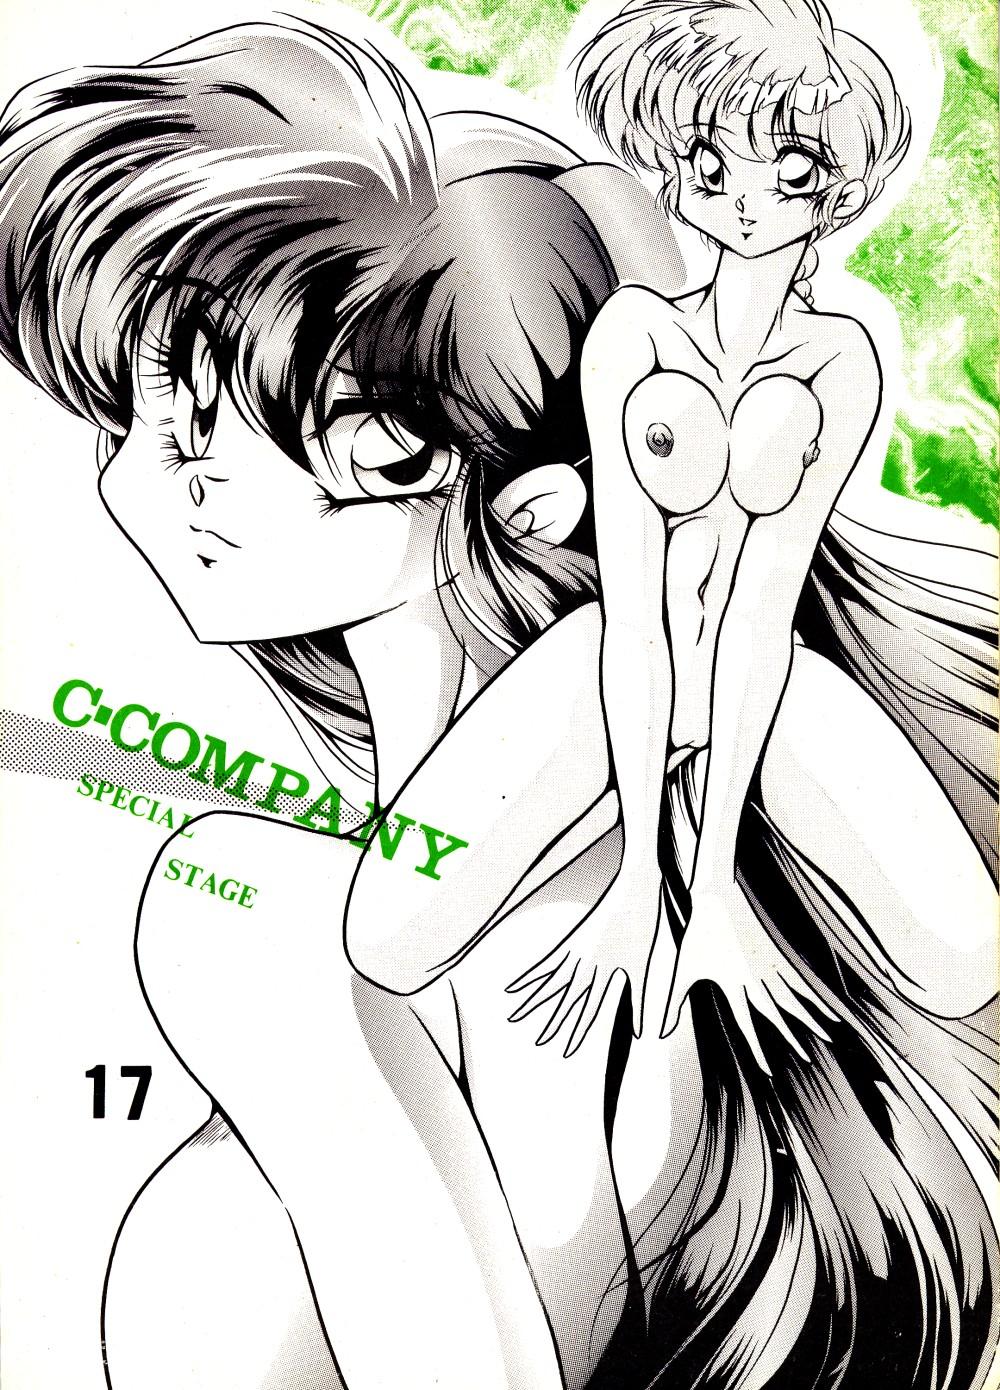 Grande C-COMPANY SPECIAL STAGE 17 - Ranma 12 Idol project Gay 3some - Page 1